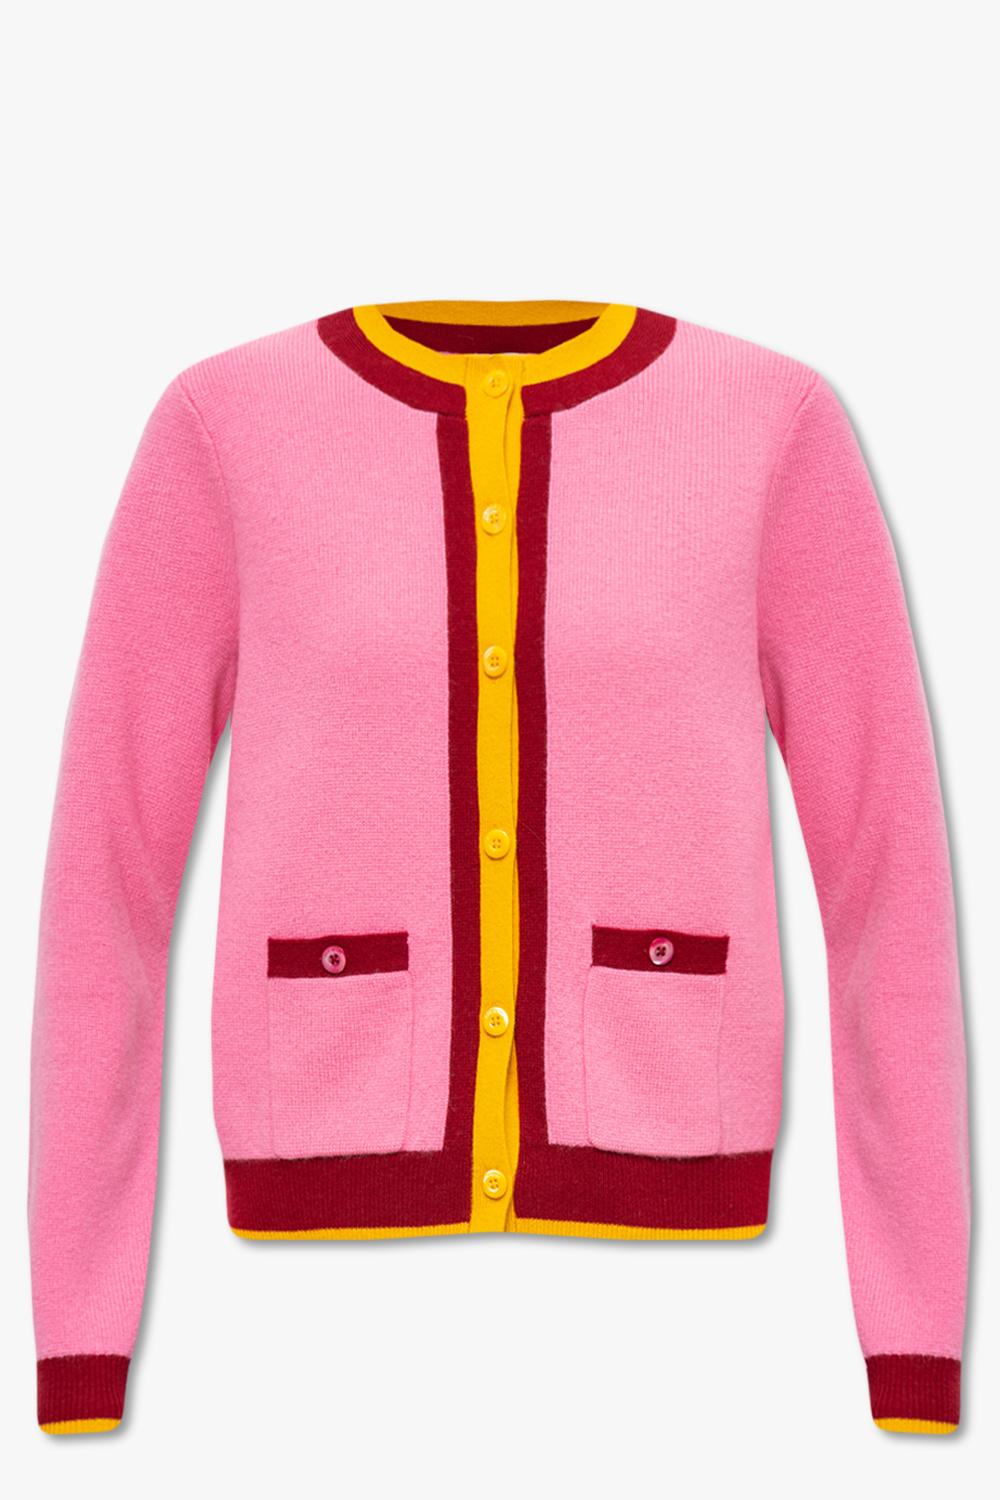 Kate Spade Cashmere Cardigan in Pink | Lyst